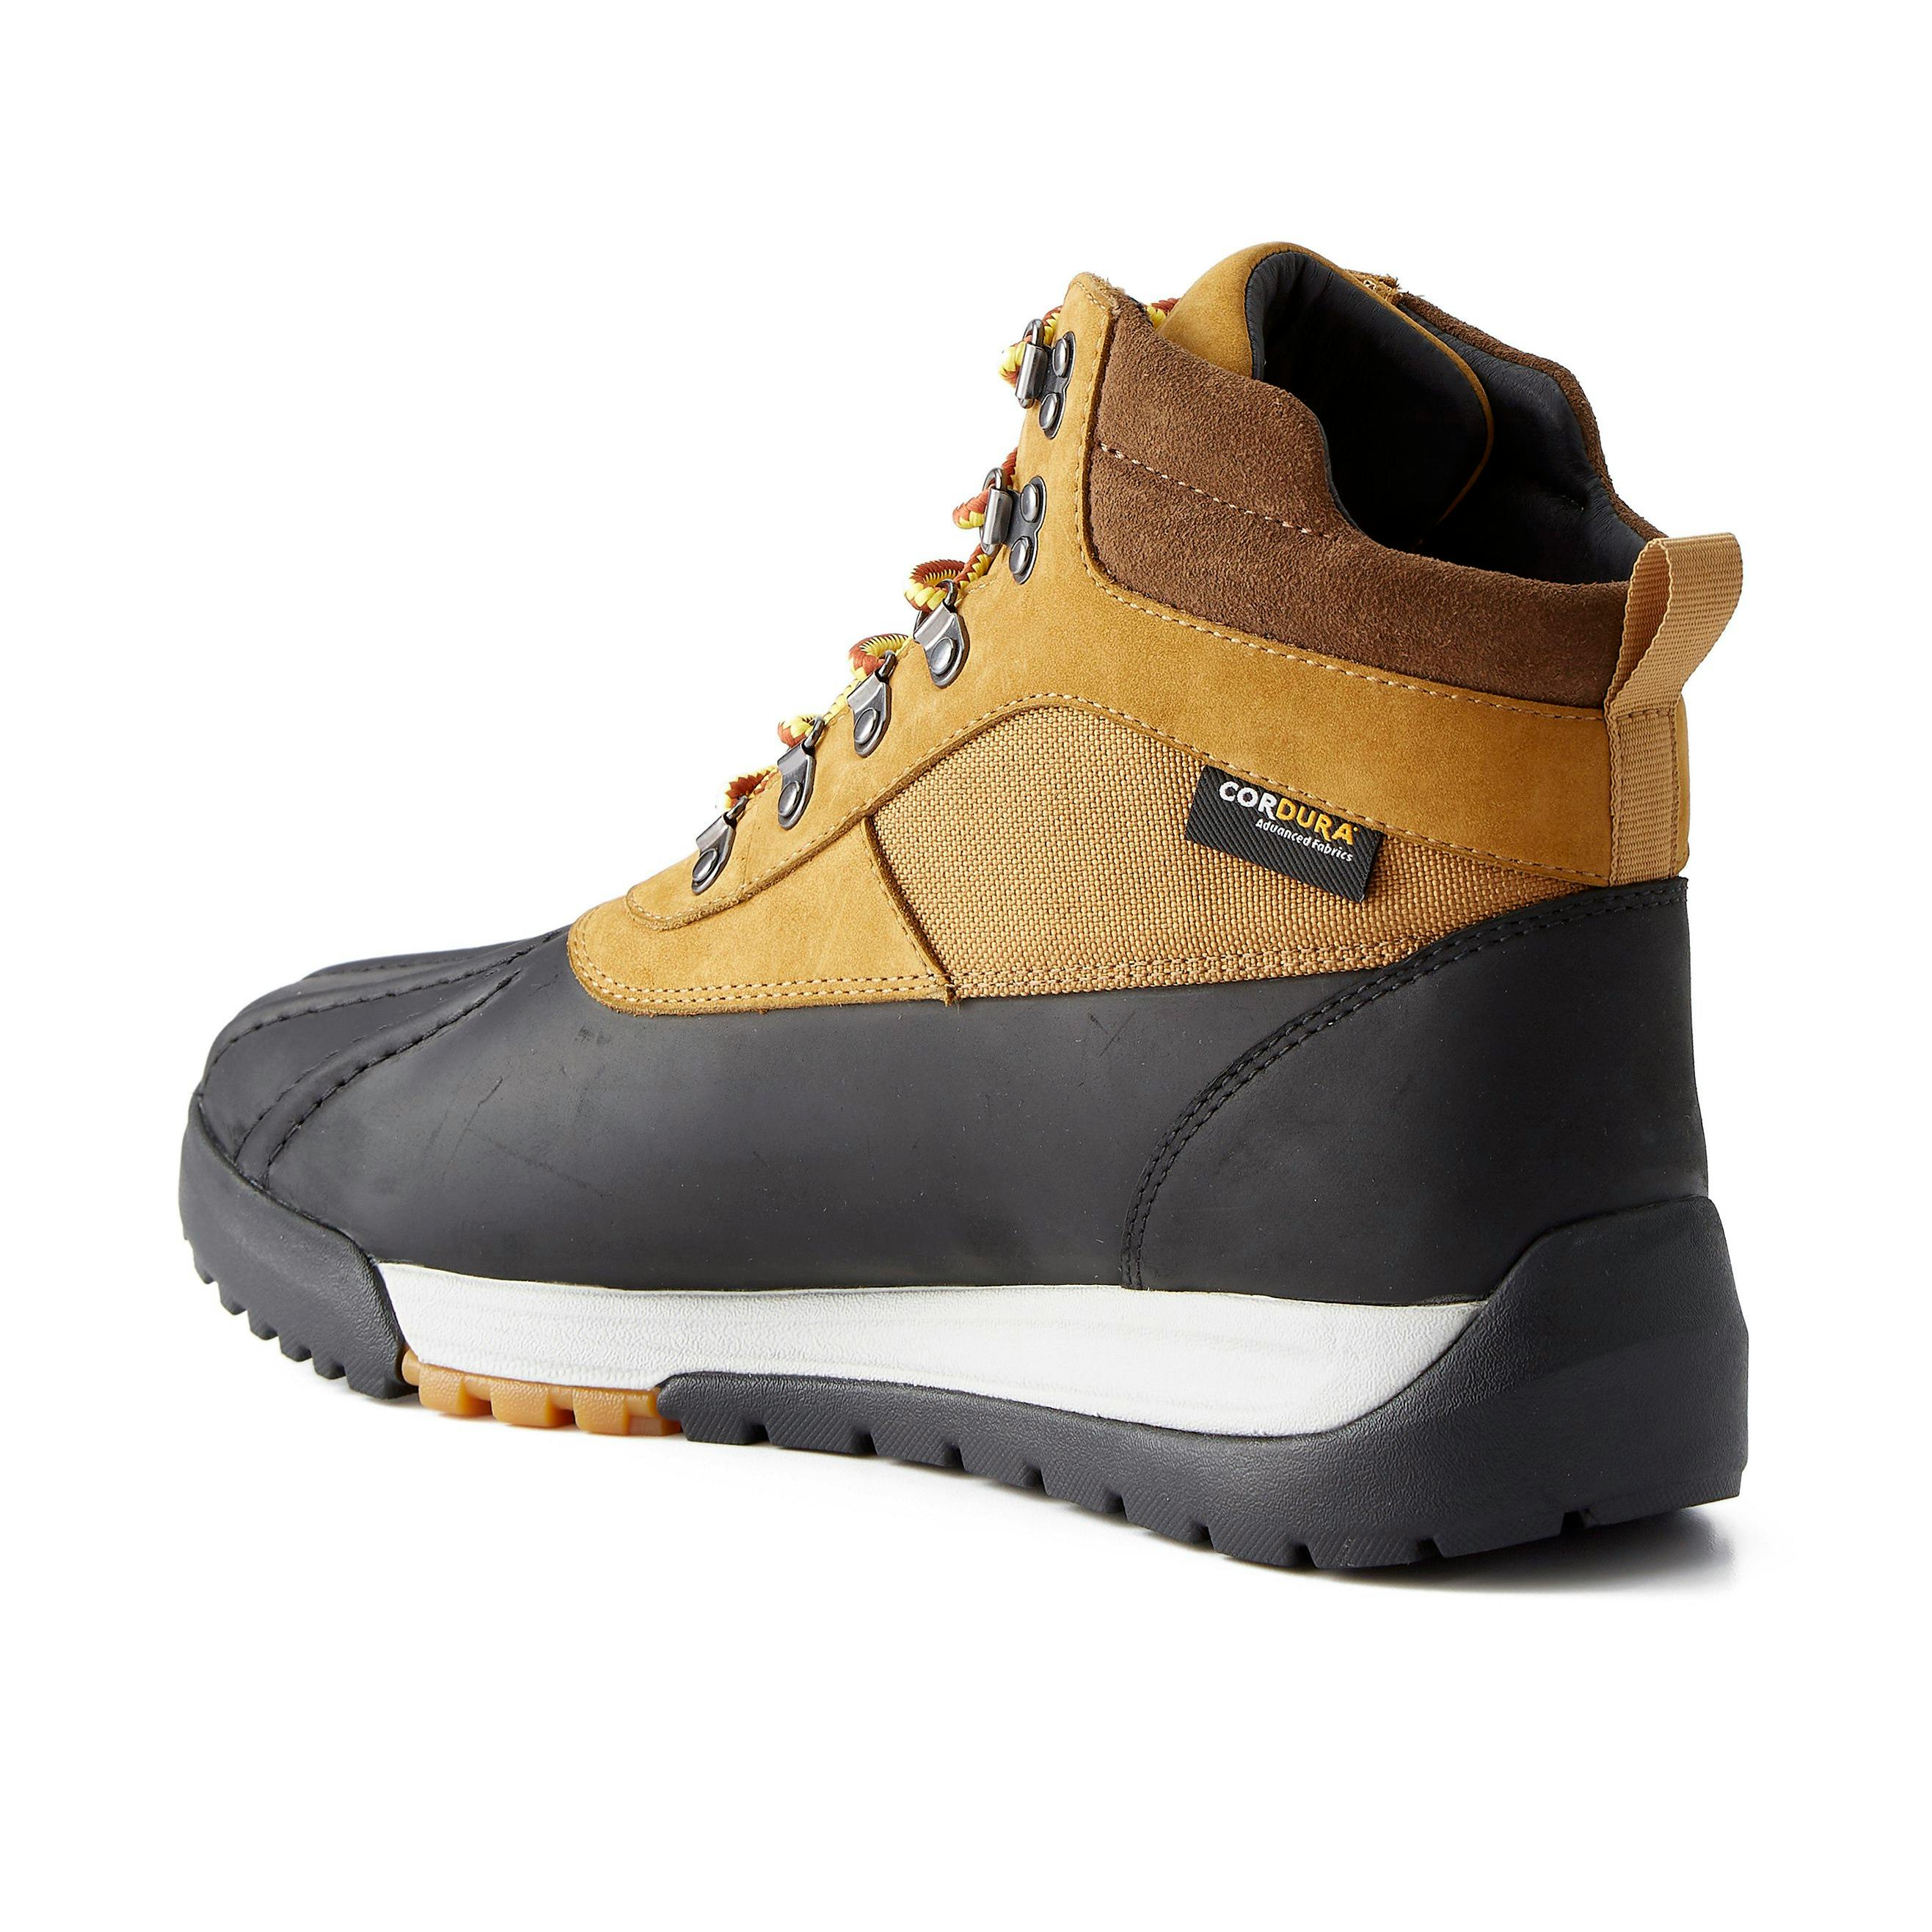 Sneakerboots: Sneakers With All-Weather Boot Power